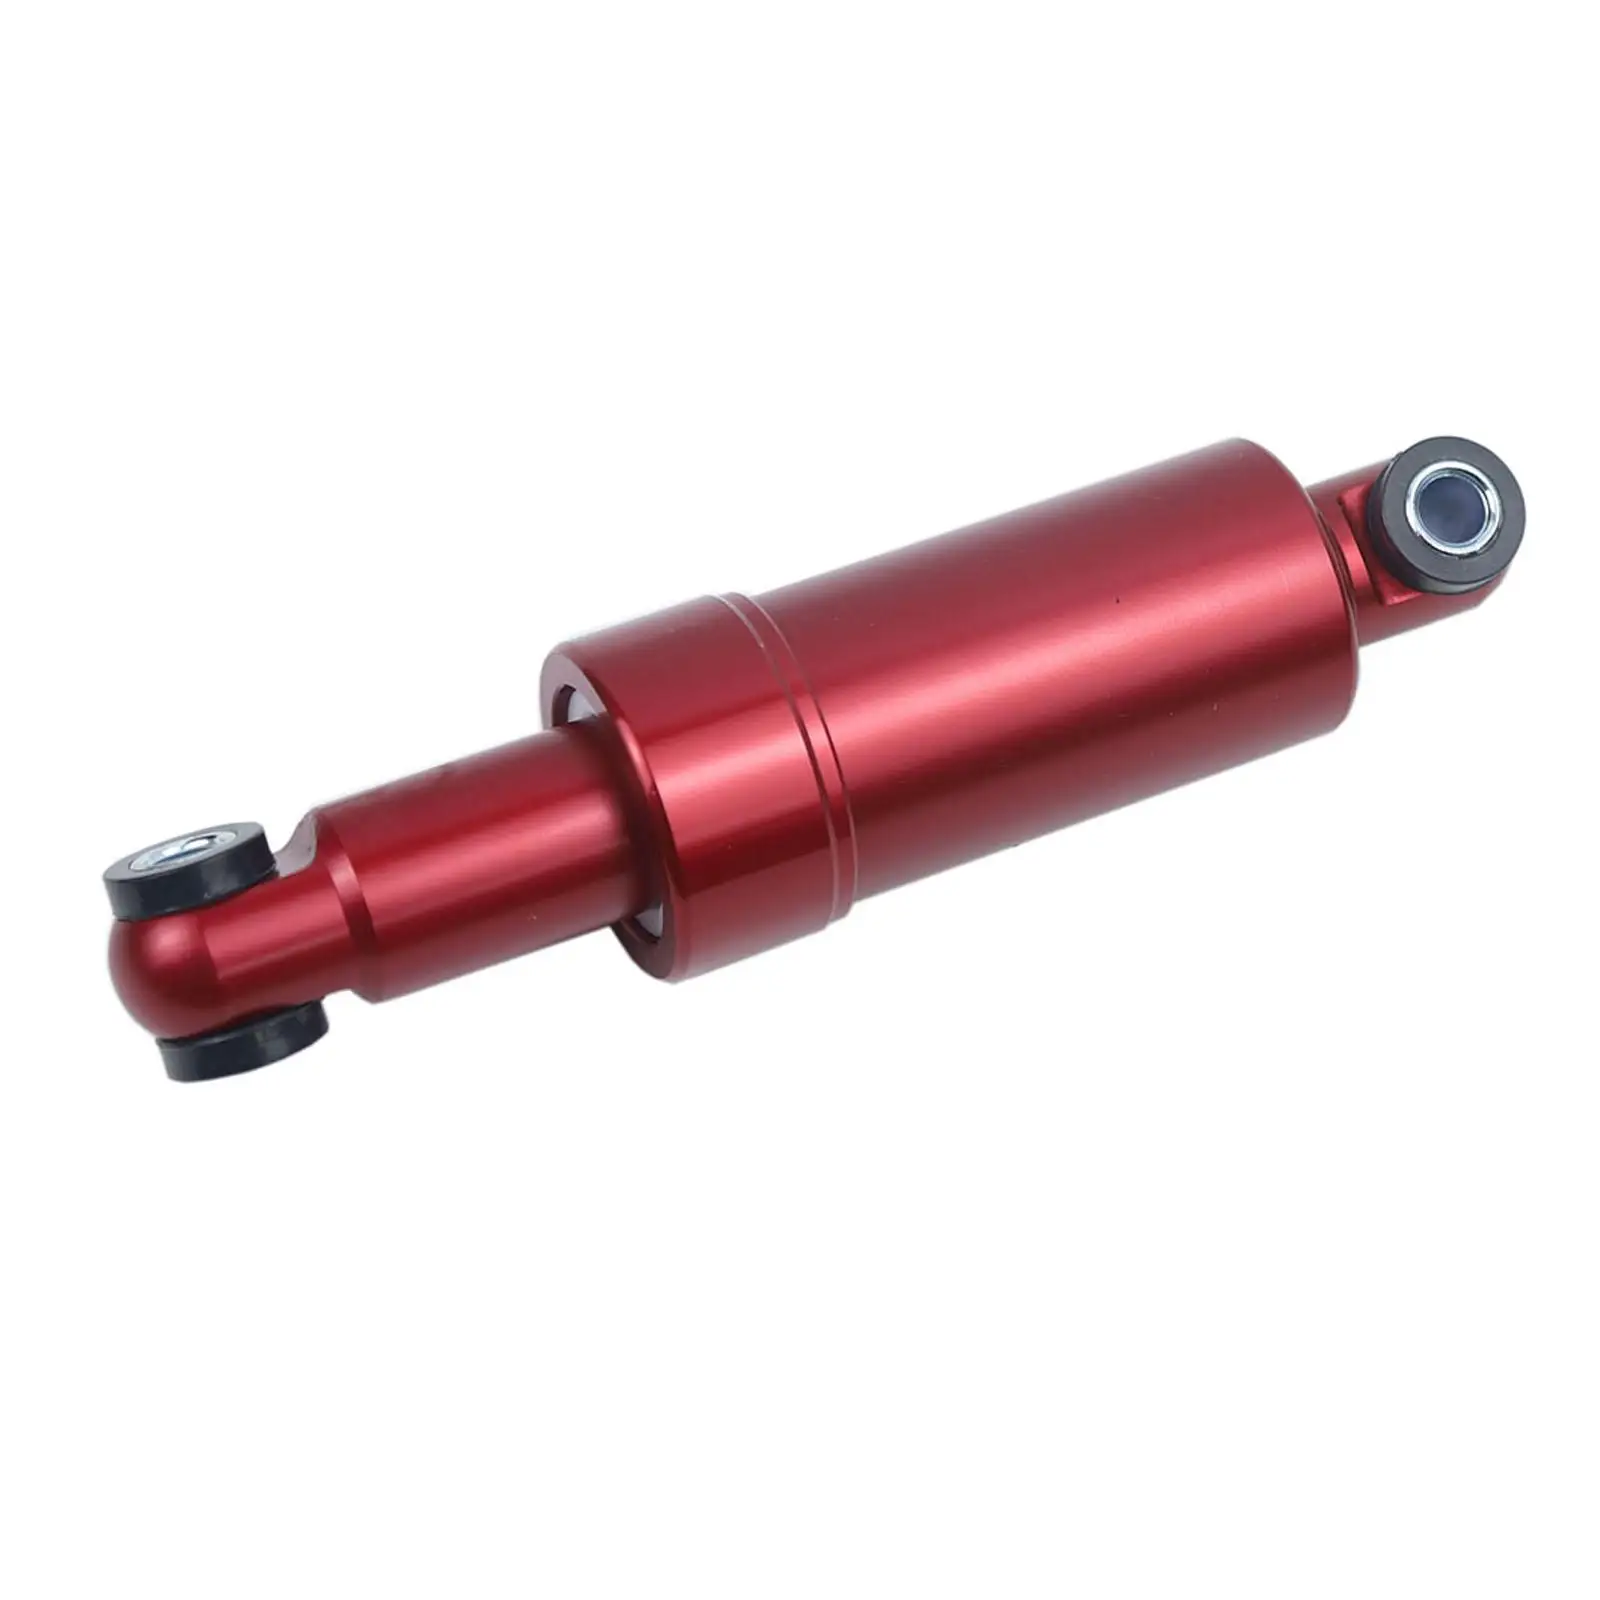 150mm Aluminum Alloy Suspension Shock Absorber Replace for Folding Scooter Mountain Bikes 49cc Pocket Bike Accessories